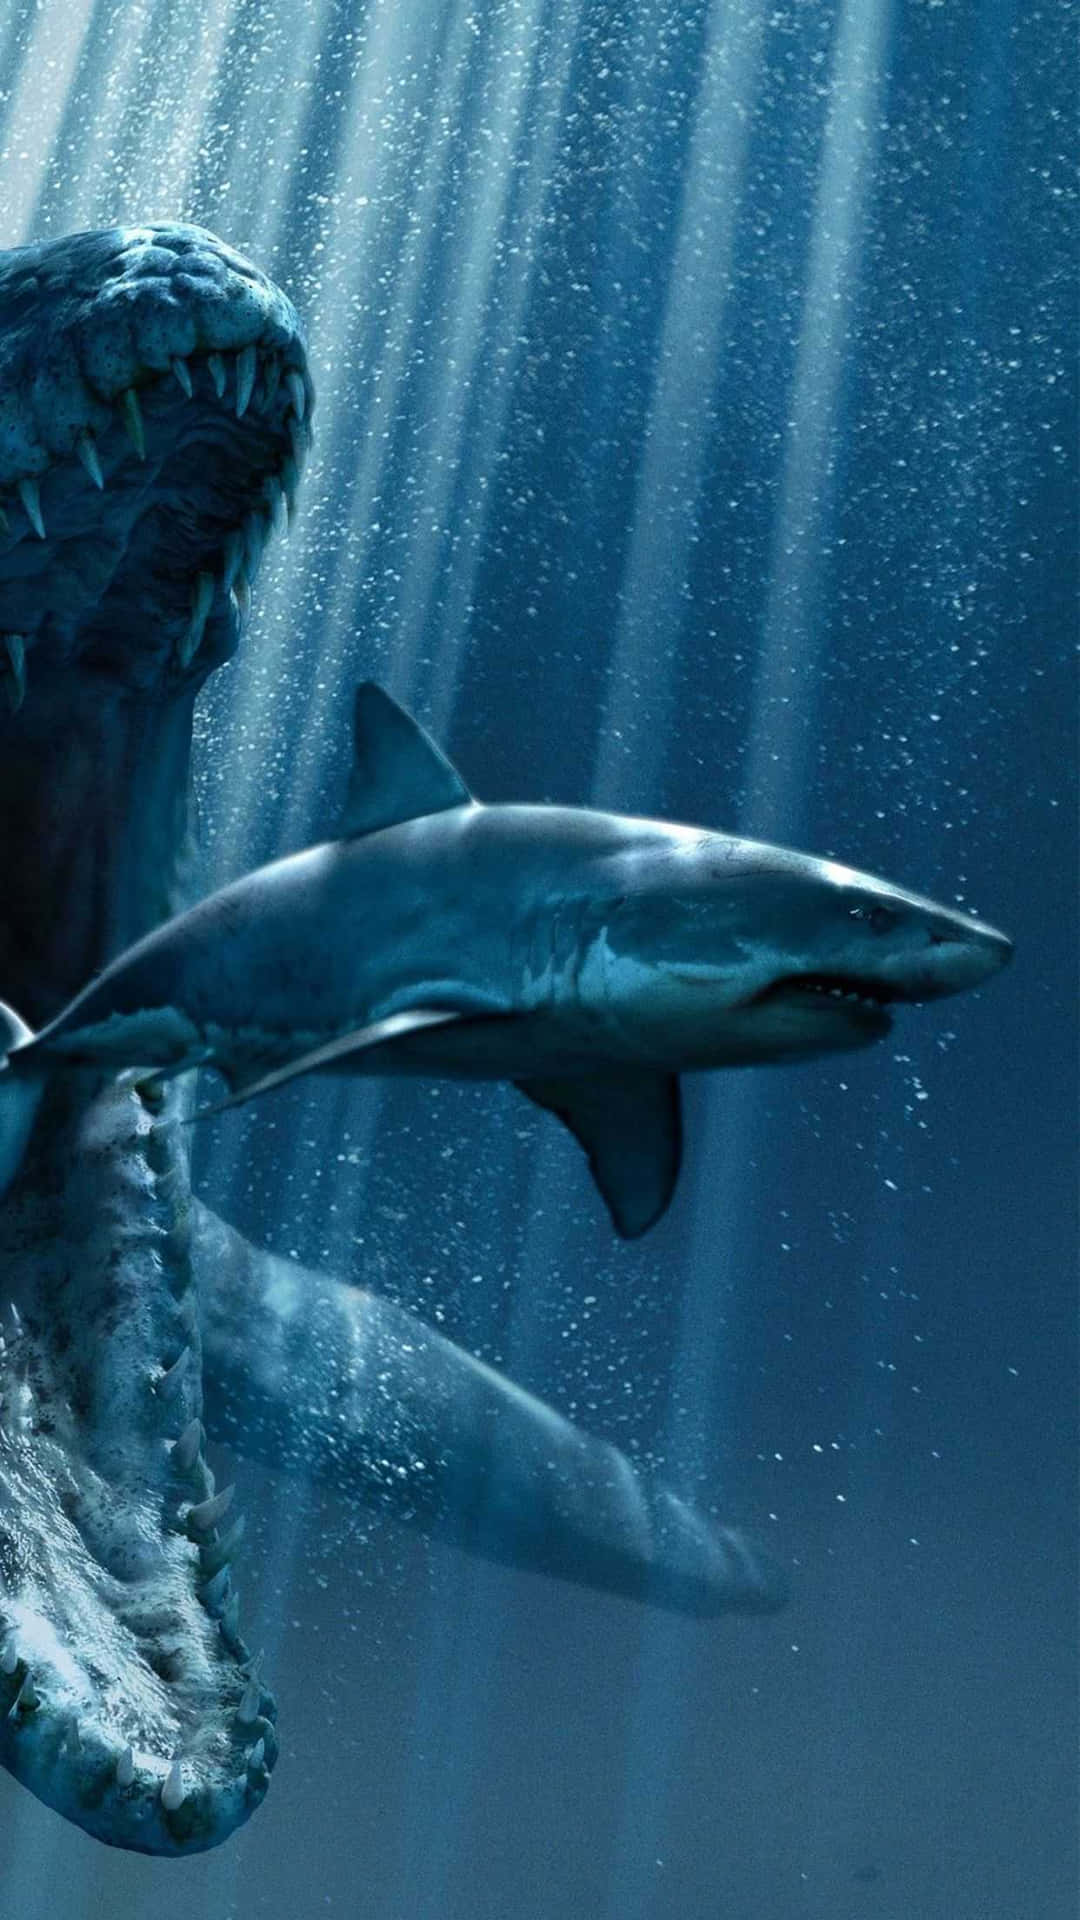 Shark Hd Wallpaper With White Shark Background Picture Of The Megalodon  Background Image And Wallpaper for Free Download